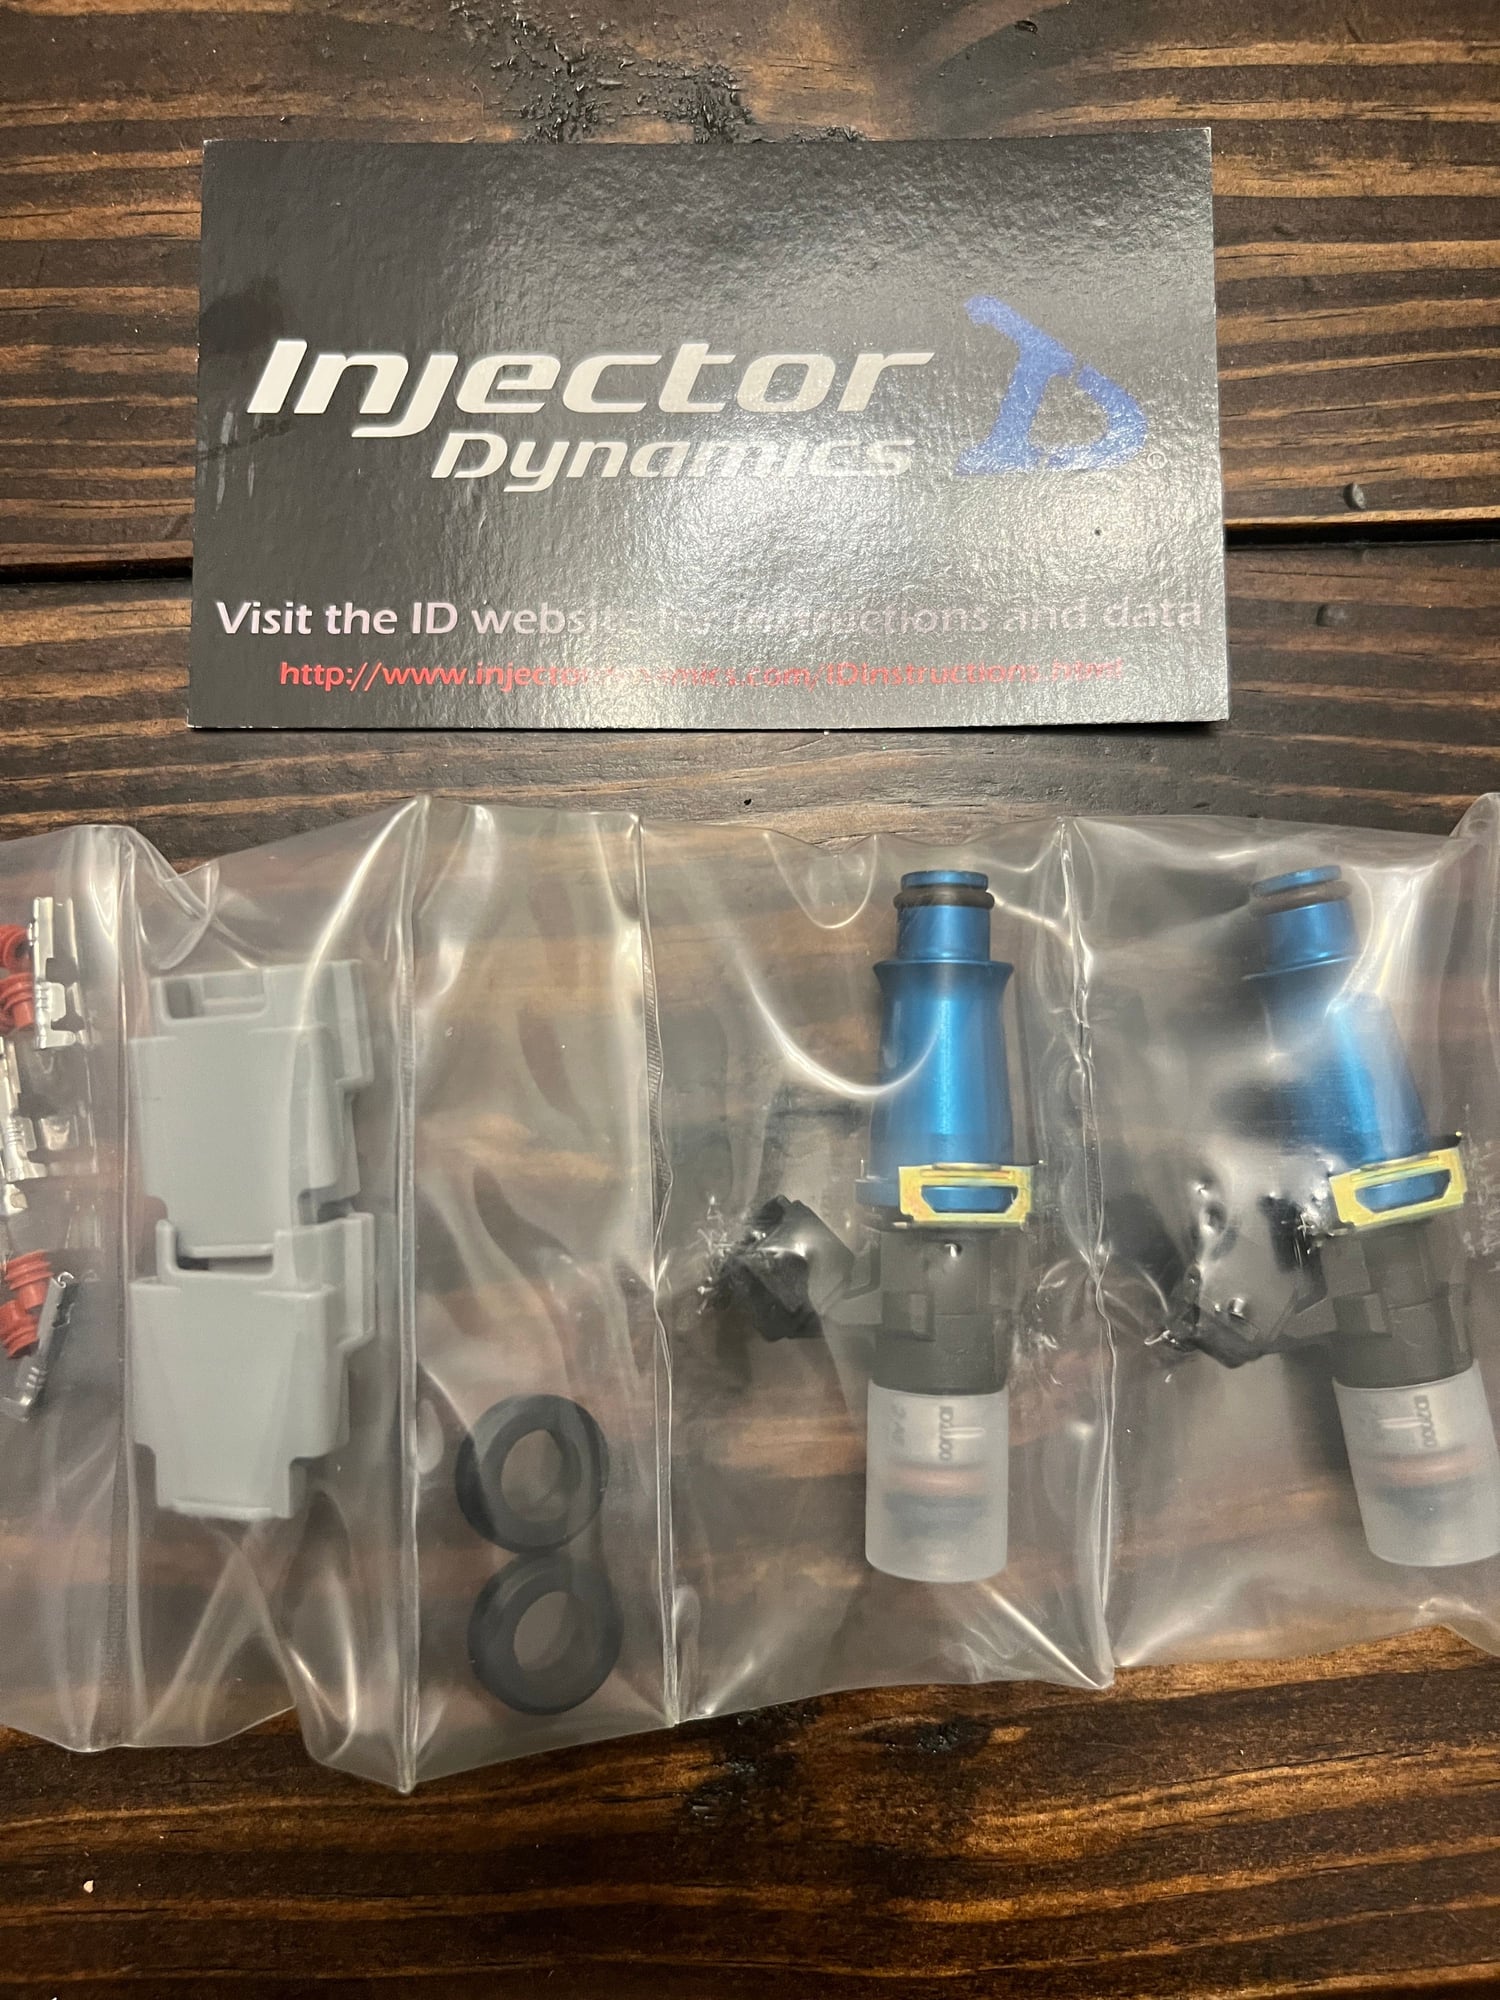 Engine - Intake/Fuel - “New” ID2000 injectors with clips - New - 1993 to 1995 Mazda RX-7 - Corbin, KY 40701, United States